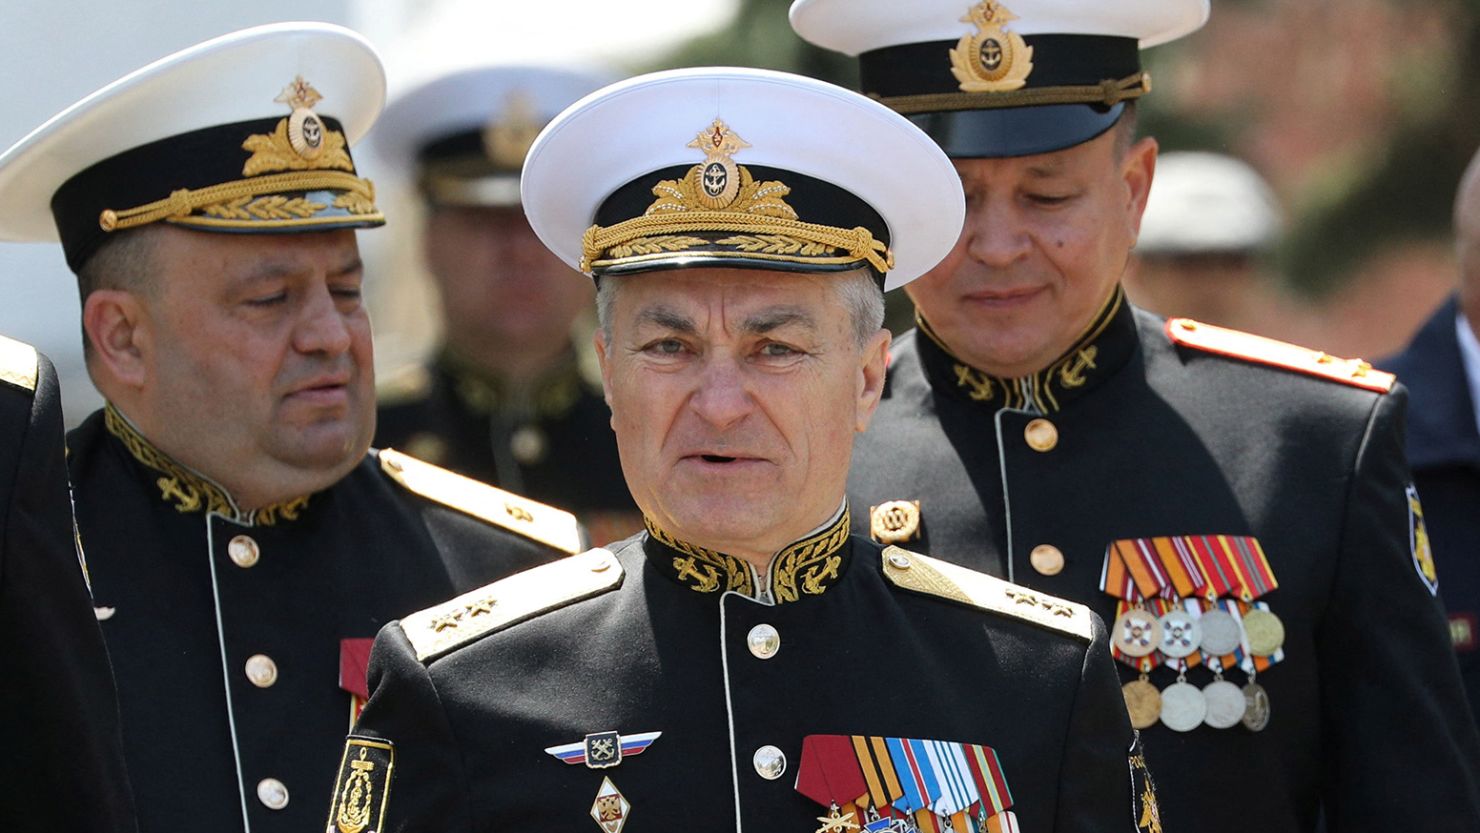 Russian Navy General Killed in Ukraine, Governor Says - The Moscow Times